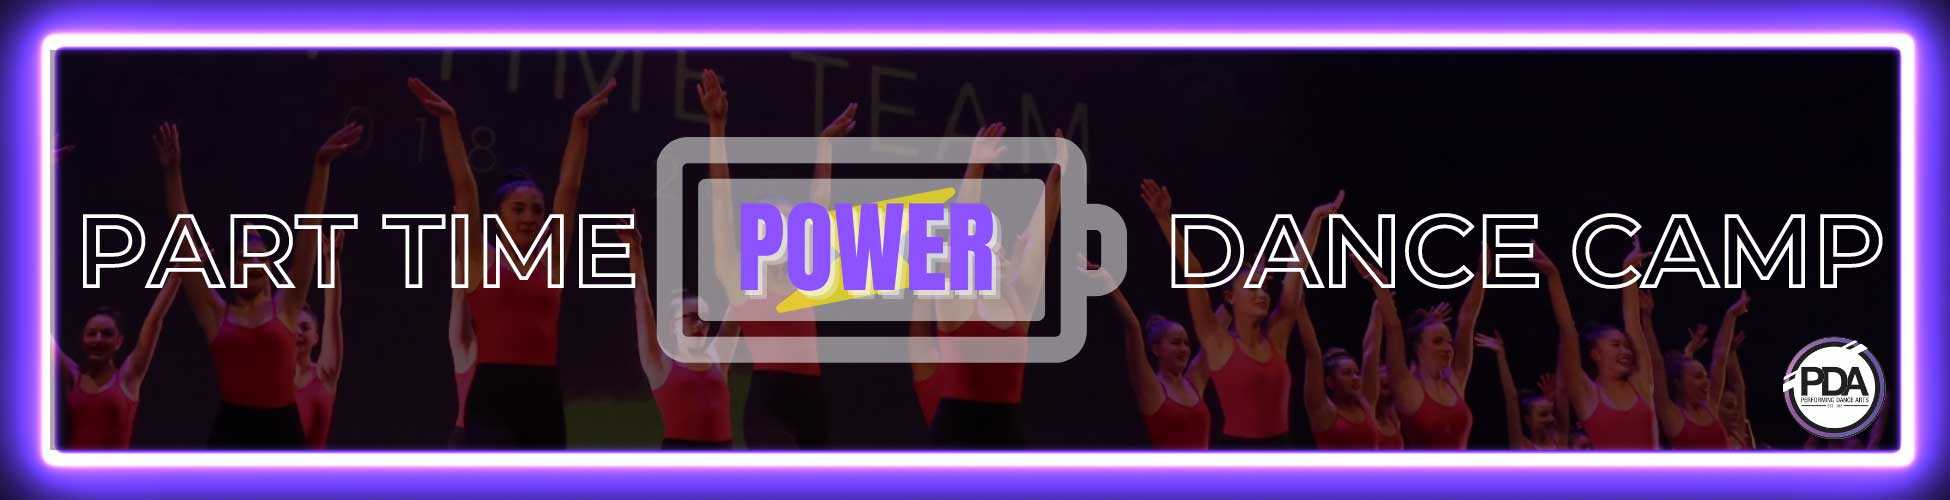 Part Time Competitive Power Dance Camp in Vaughan and Etobicoke